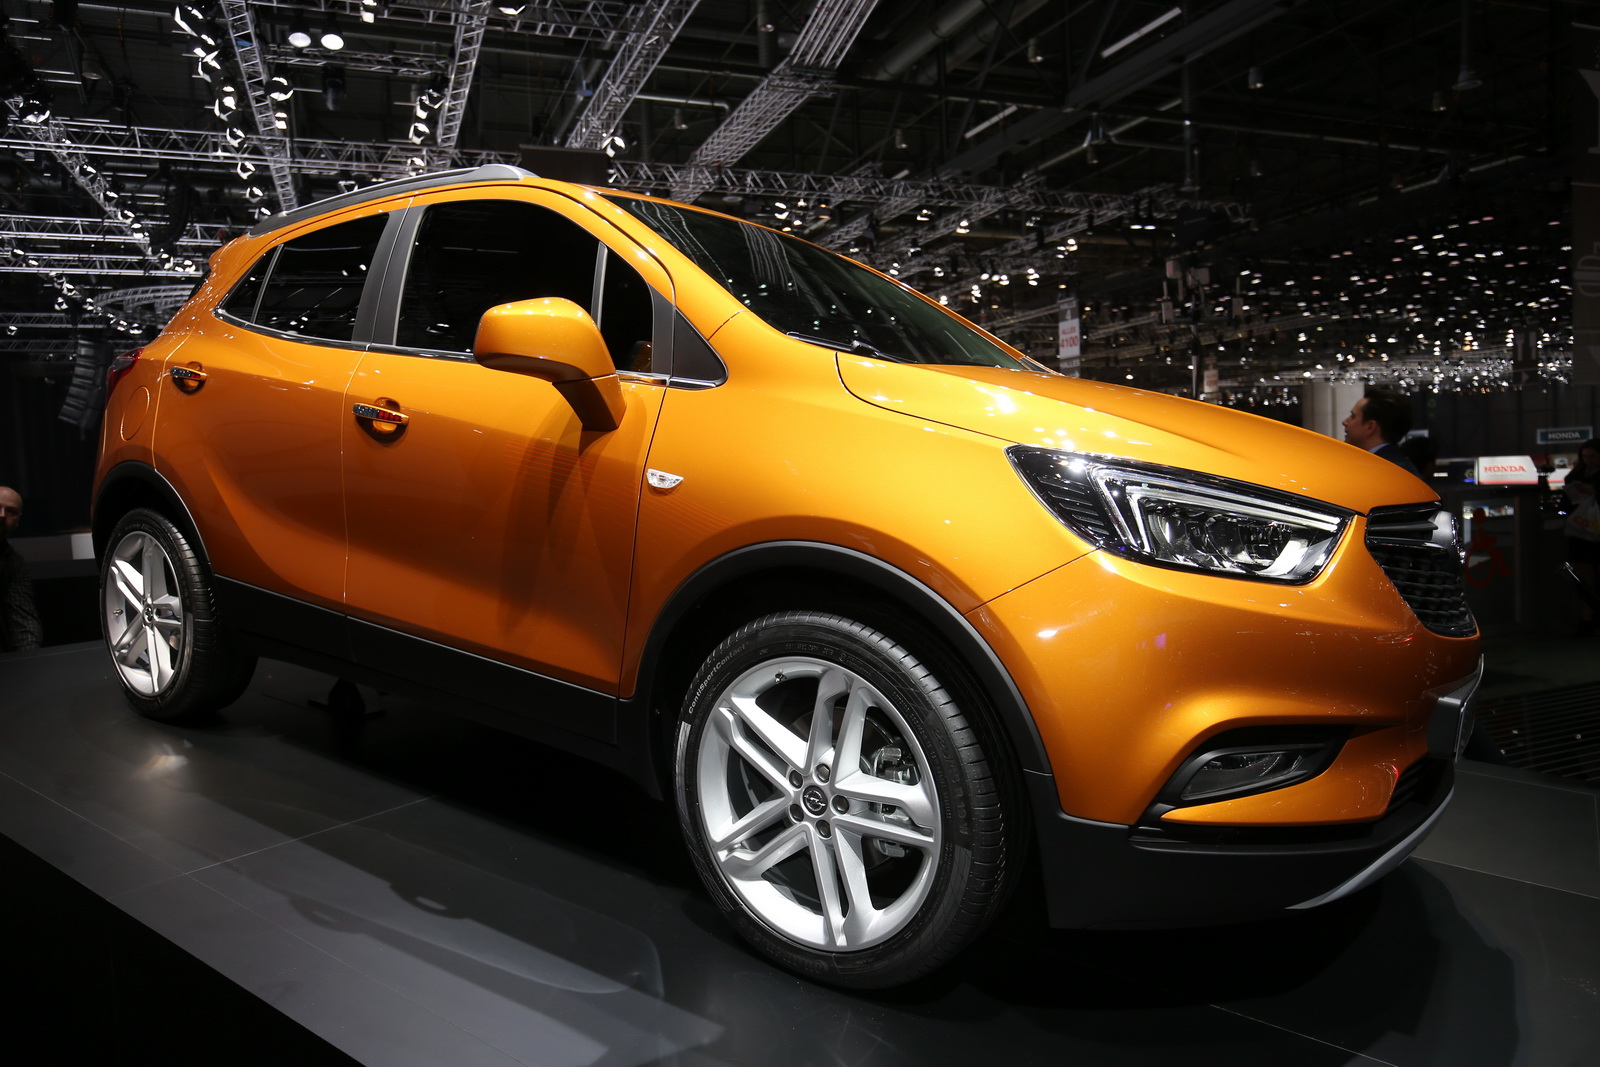 Facelifted Opel Mokka X Is A Sign Of Things To Come For Buick's Encore | Carscoops1600 x 1067